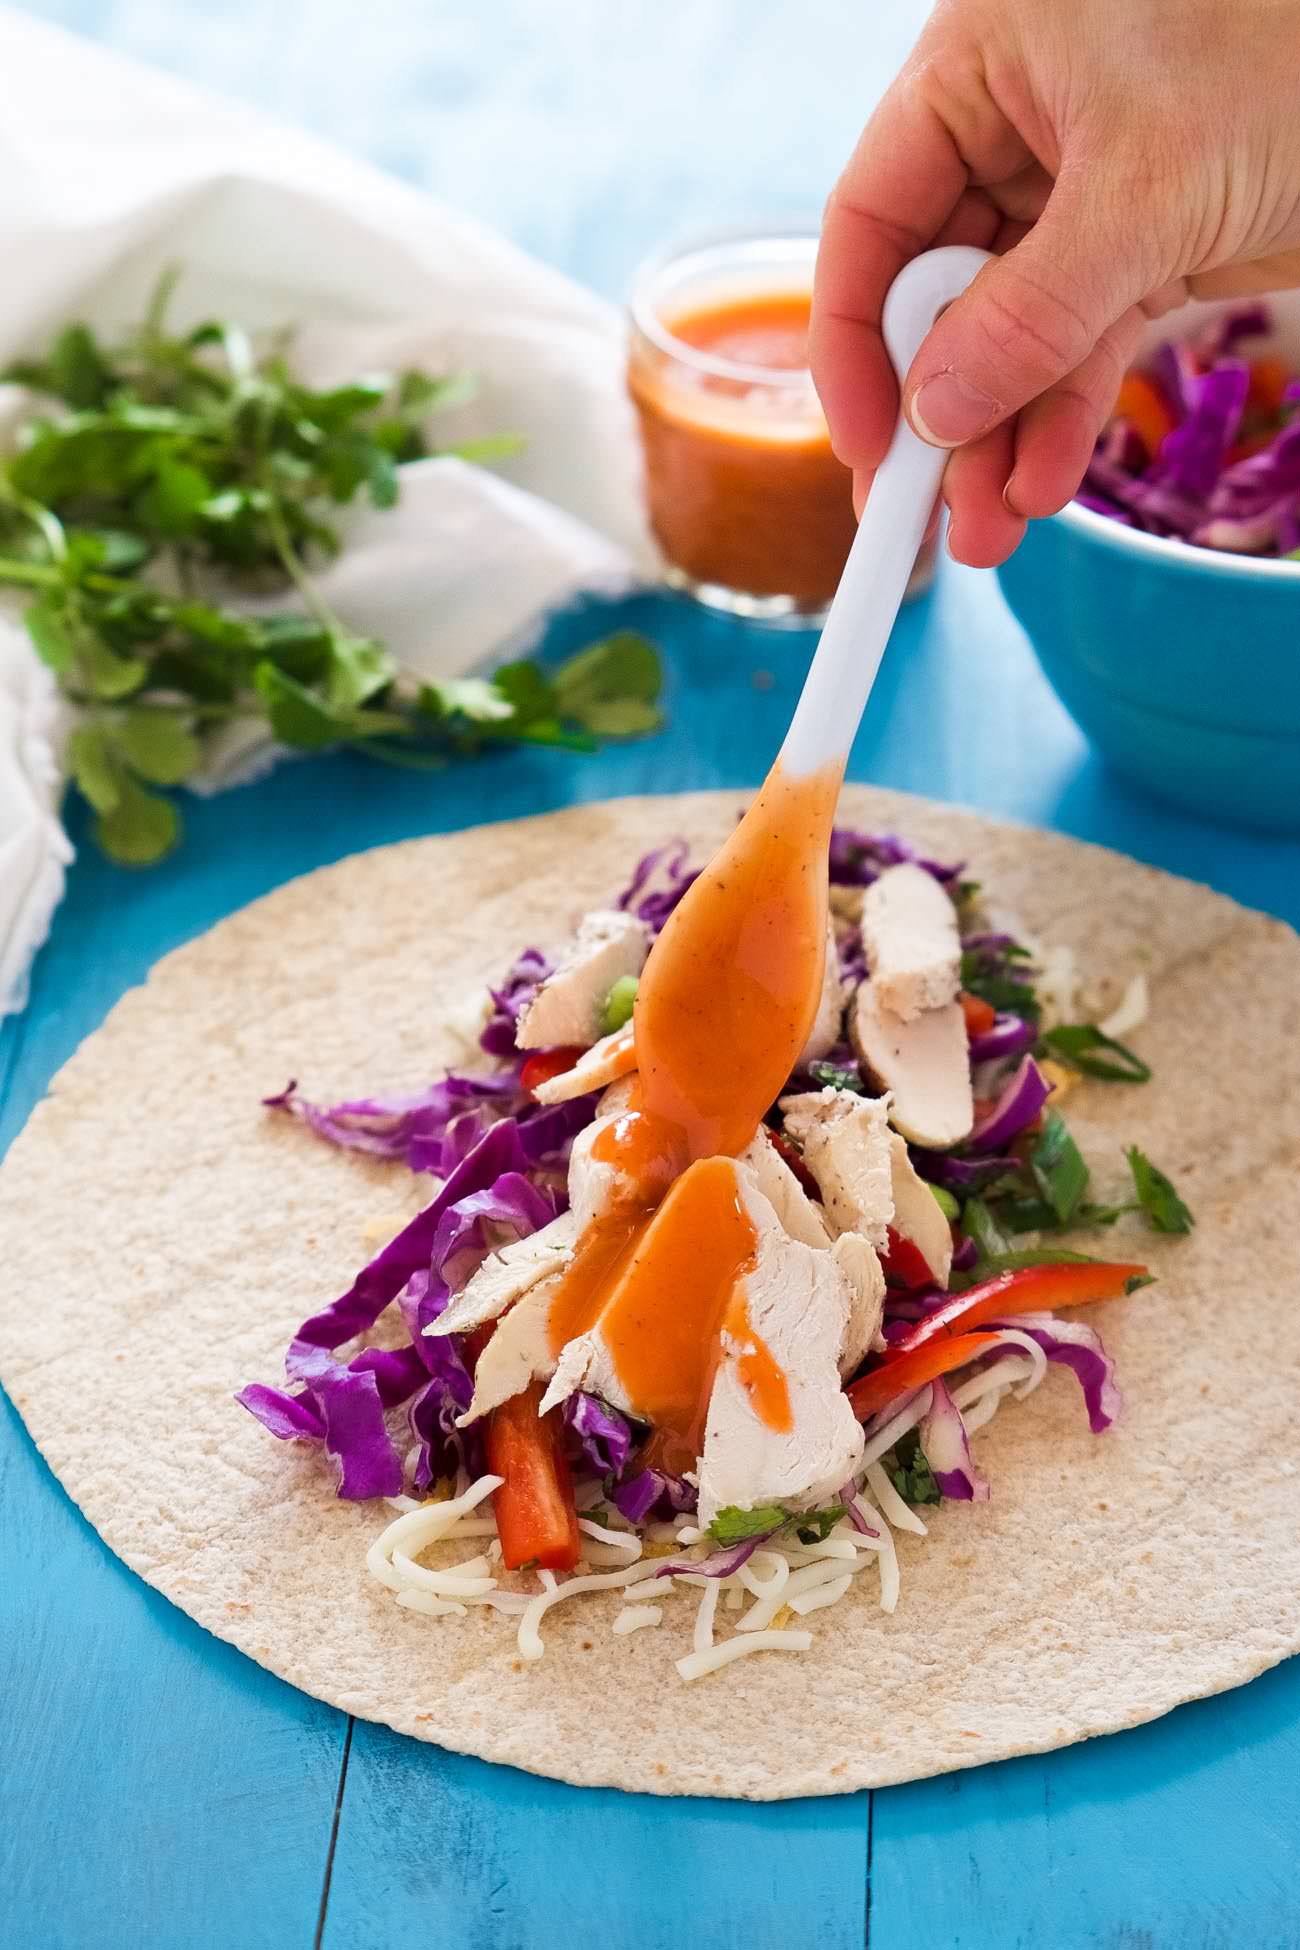 These Hot & Spicy Thai Chicken Wraps is the perfect quick dinner or lunch! Filled with a spicy thai slaw, grilled chicken, pepper jack cheese and drizzled with an addicting Sriracha honey aioli!